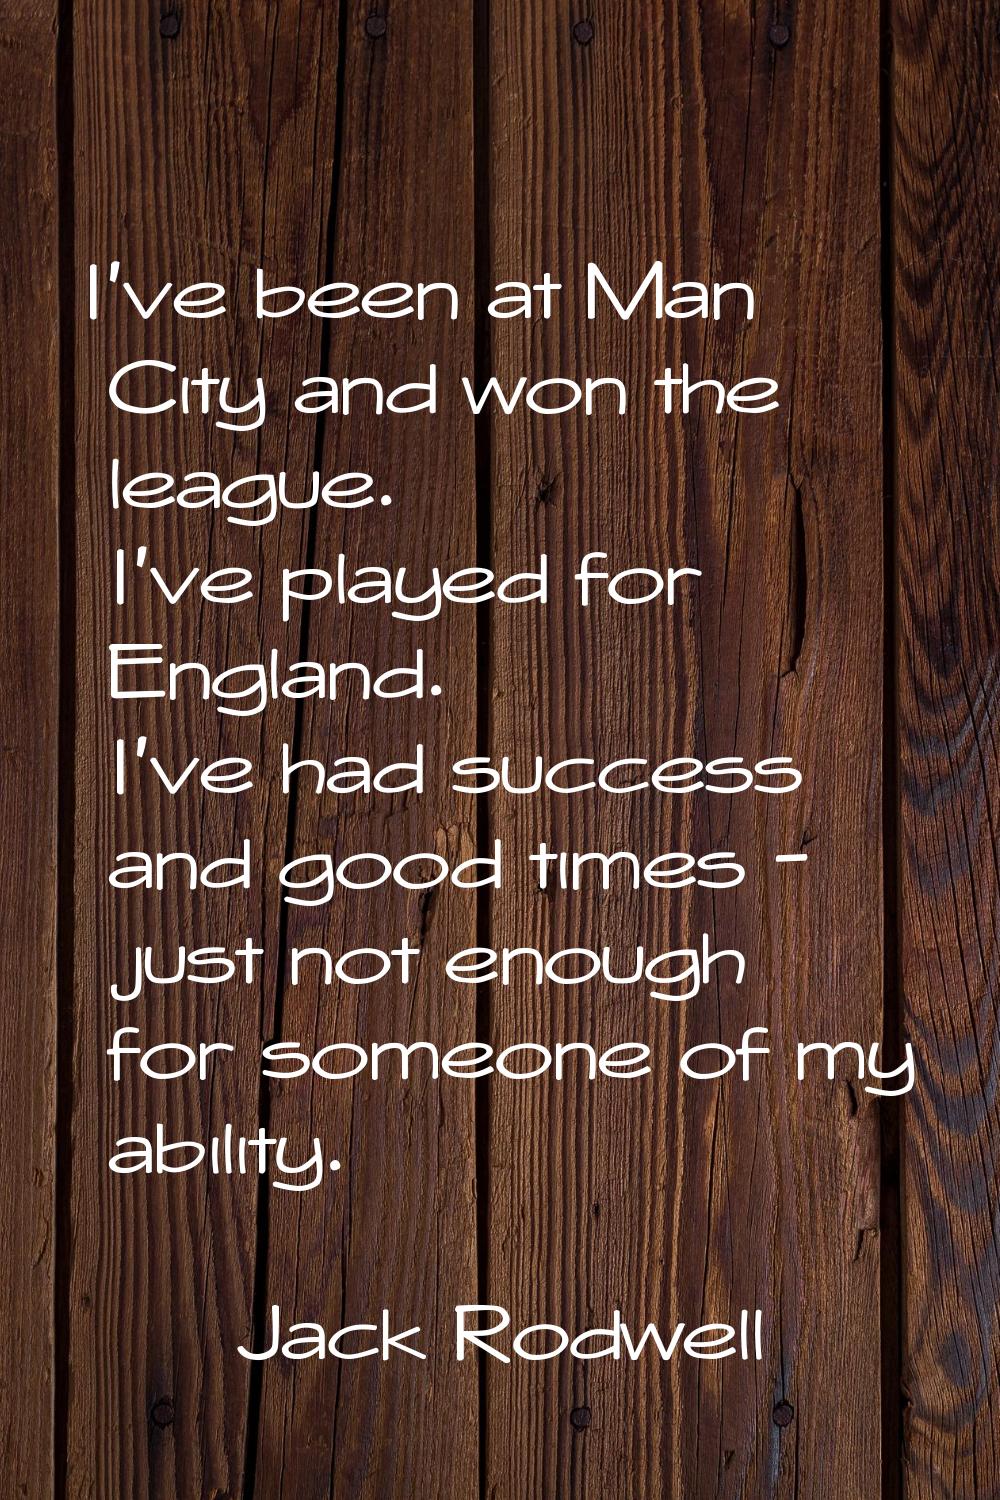 I've been at Man City and won the league. I've played for England. I've had success and good times 